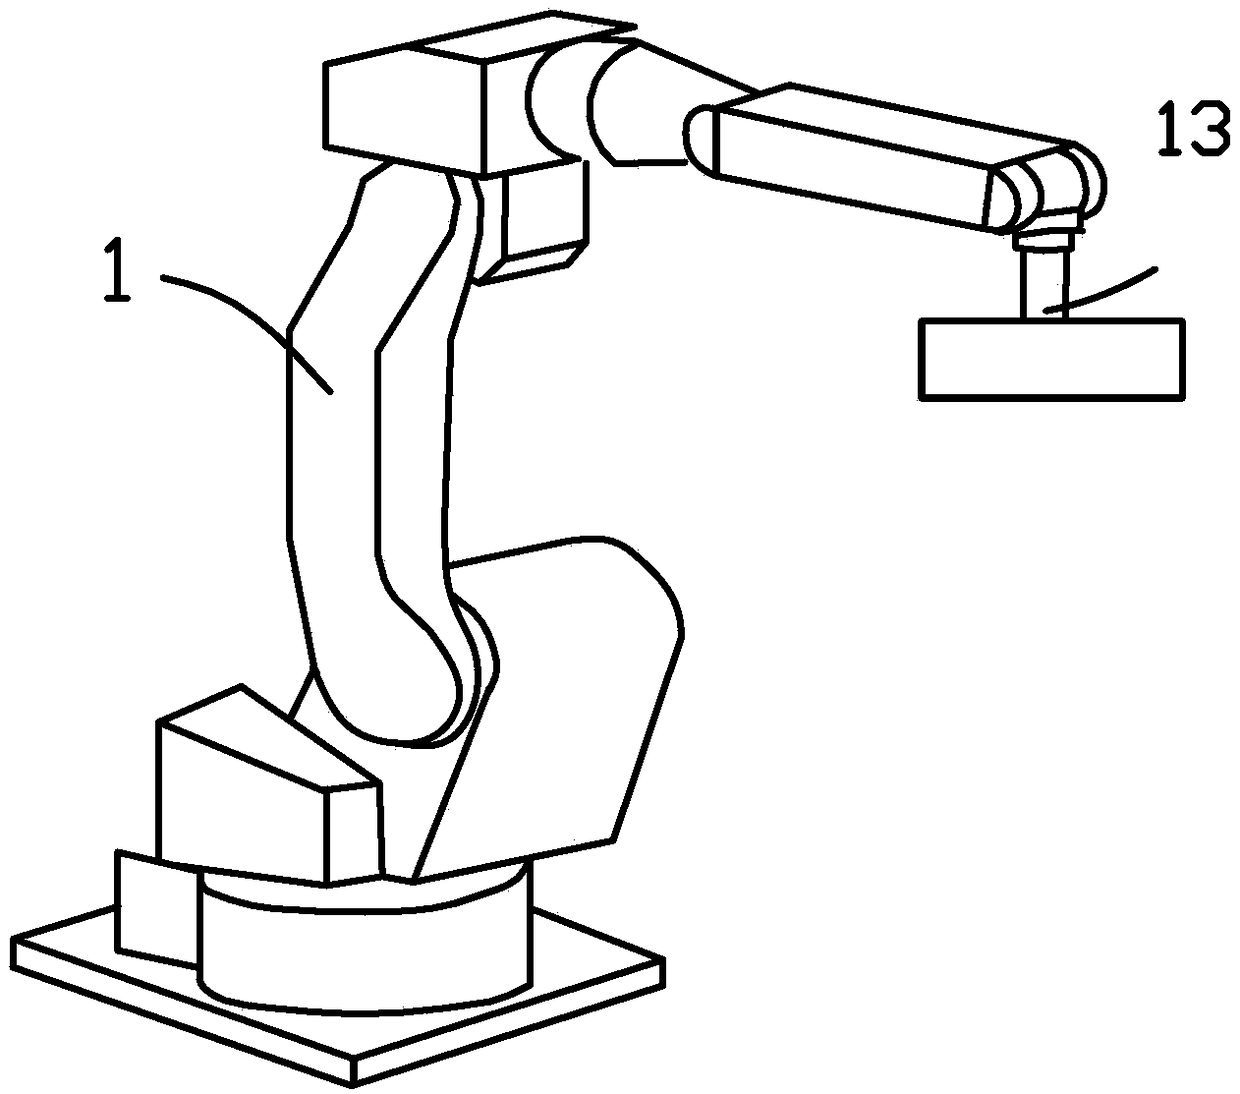 Industrial robot demonstration device based on six freedom degree